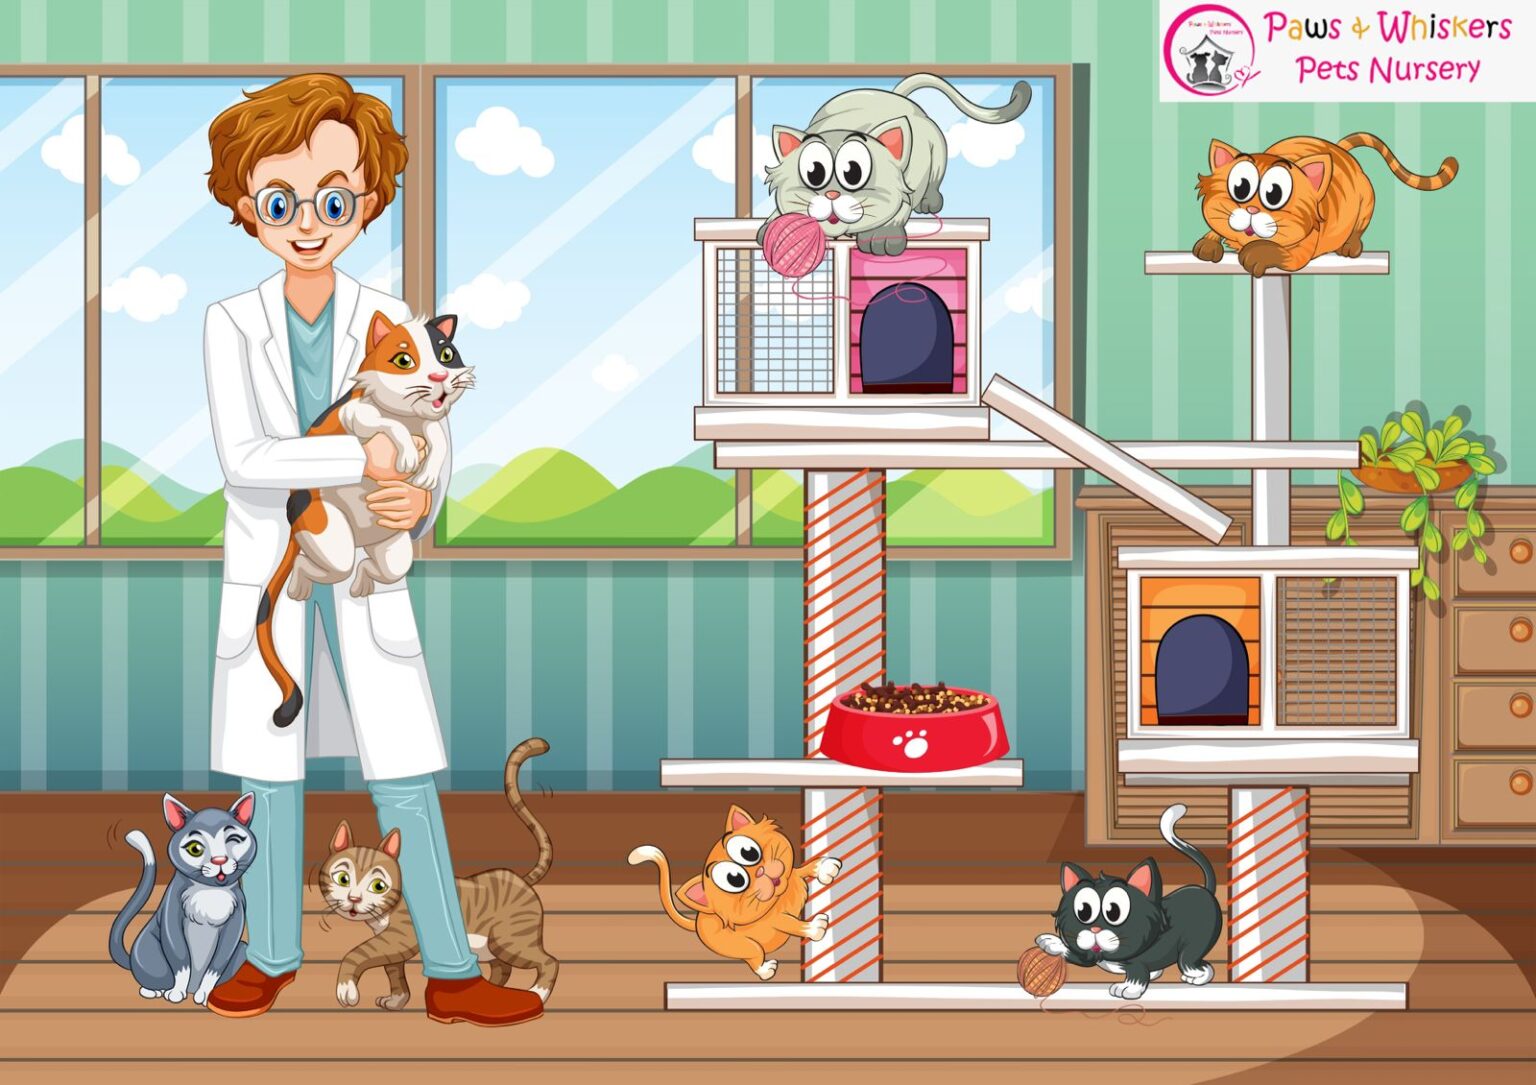 PAWS AND WHISKERS PET NURSERY